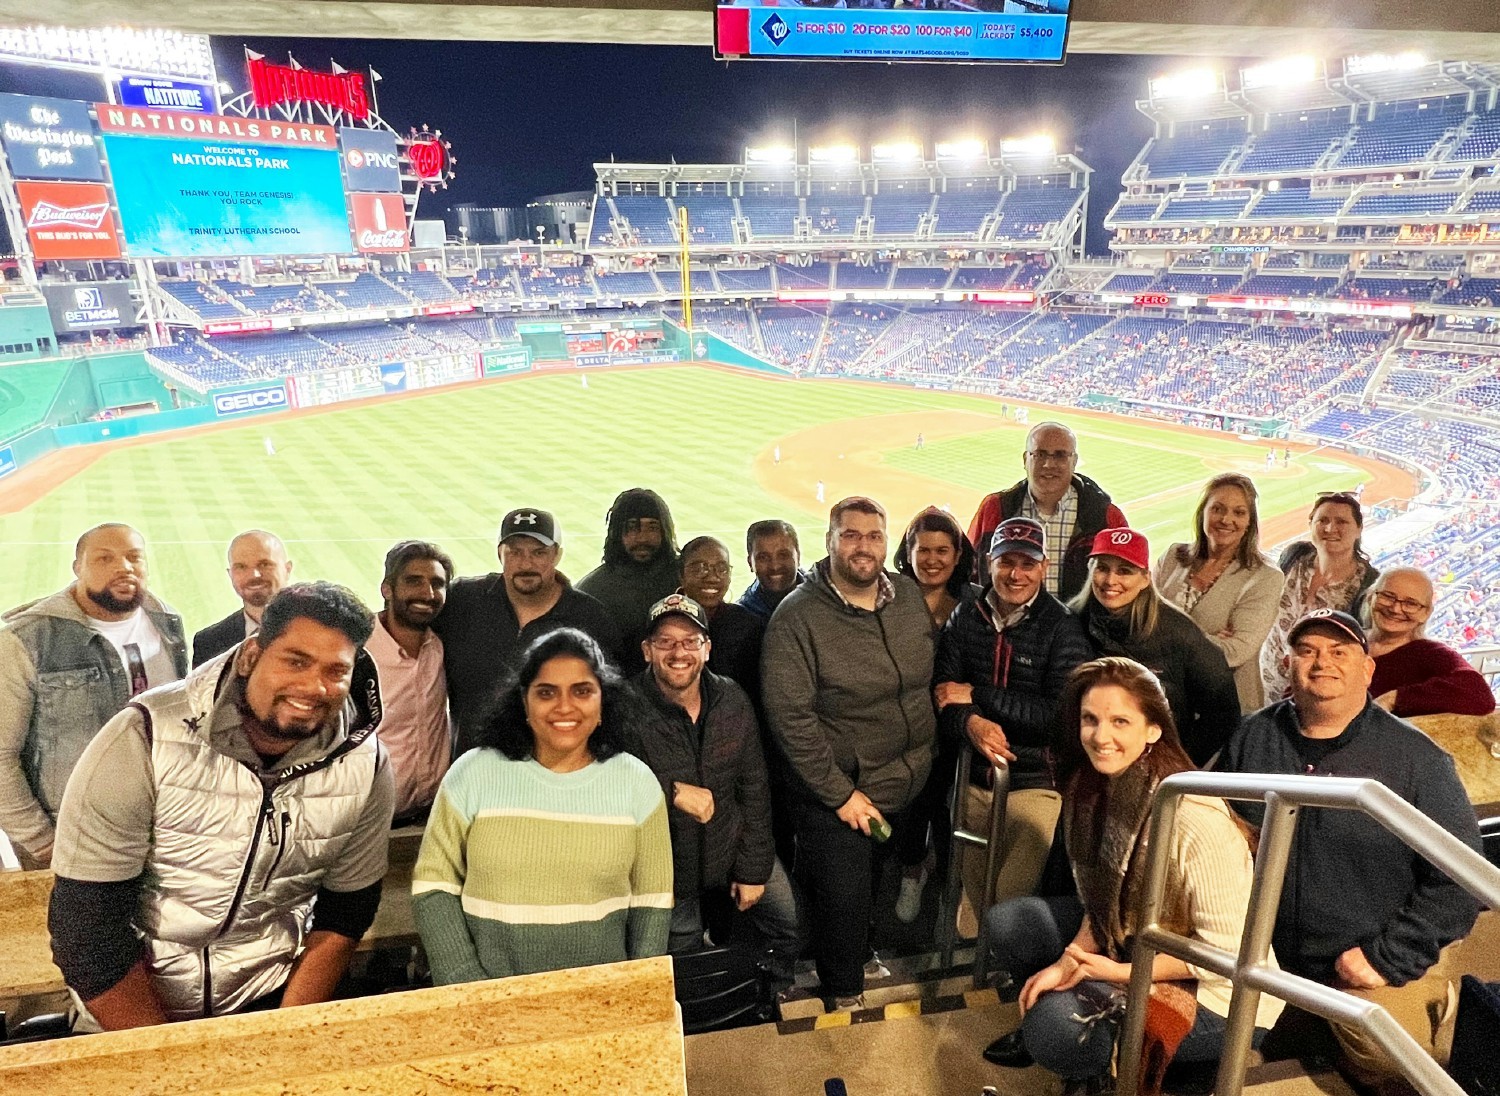 Work hard, play hard! Some of our US-based Genesis team members enjoy a night out at Nationals Park in Washington, DC.